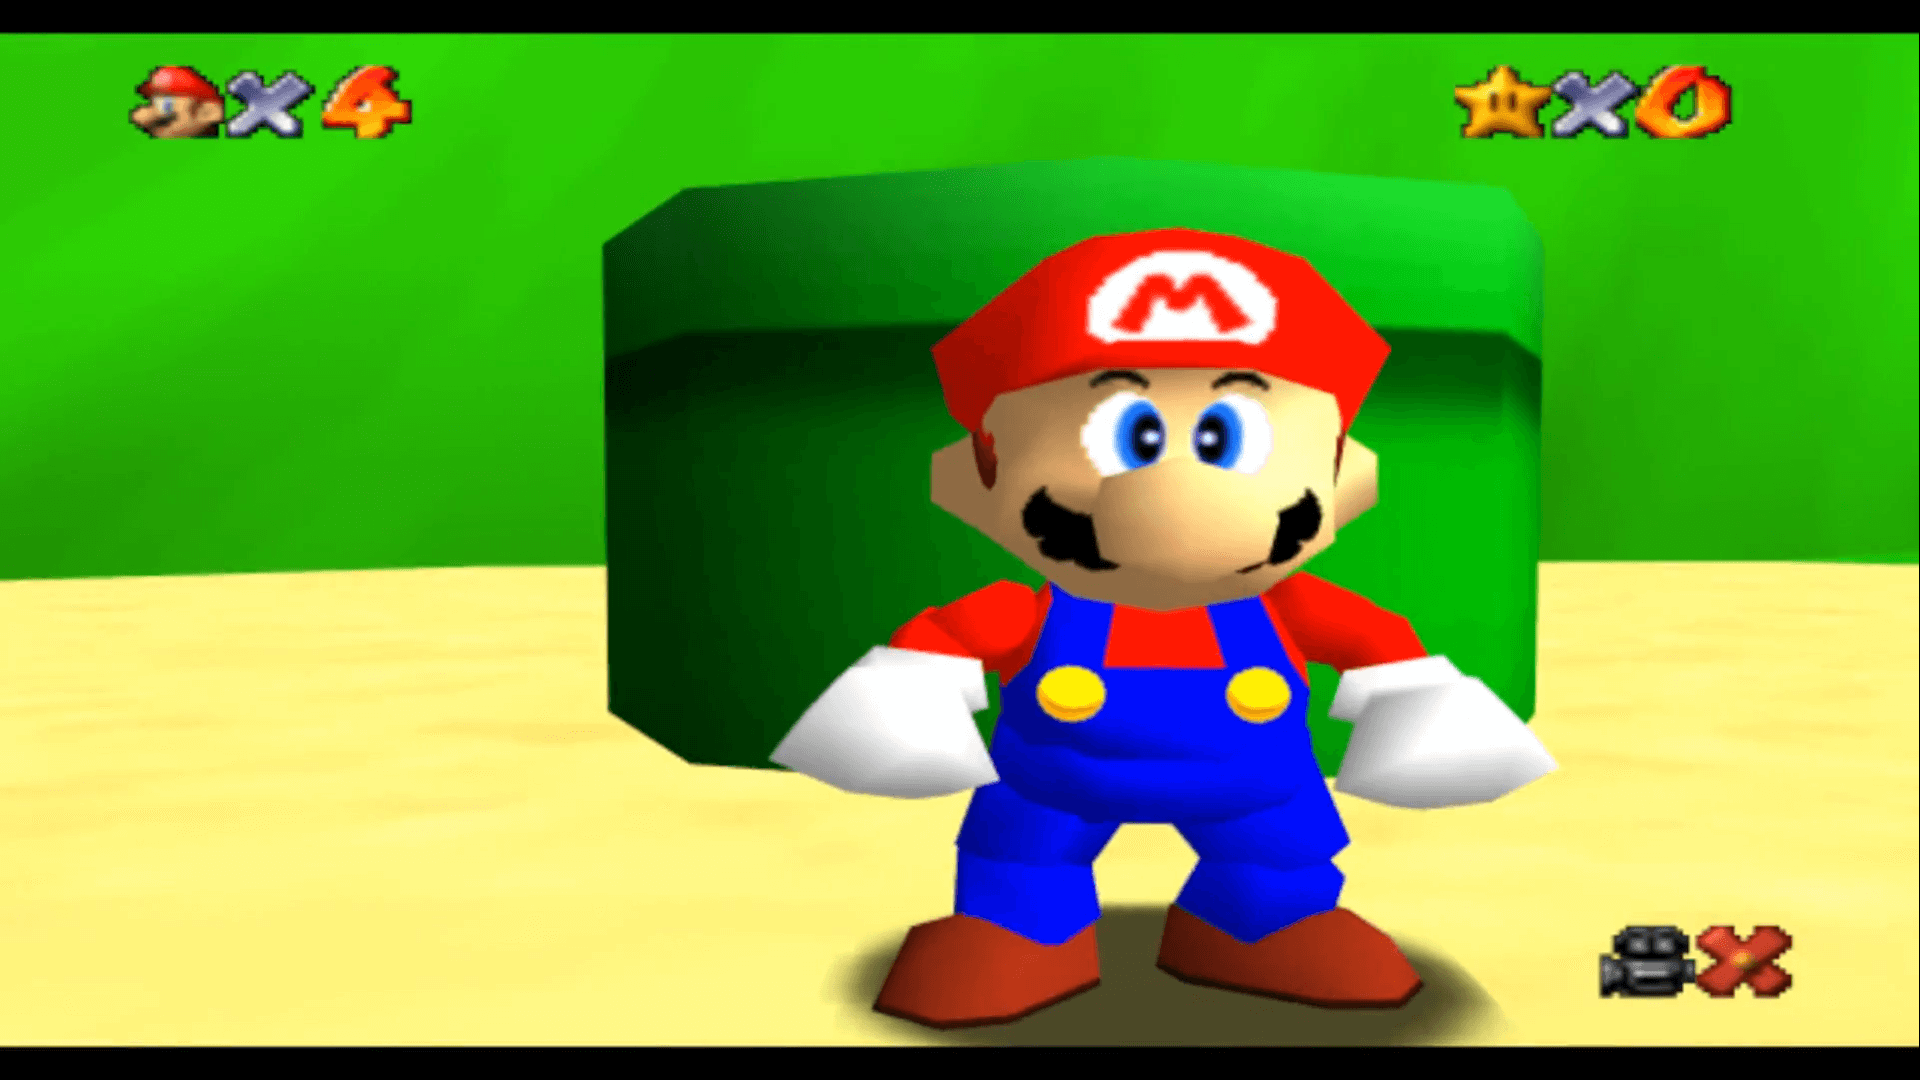 Someone made a version of Super Mario 64 that up to 24 people can